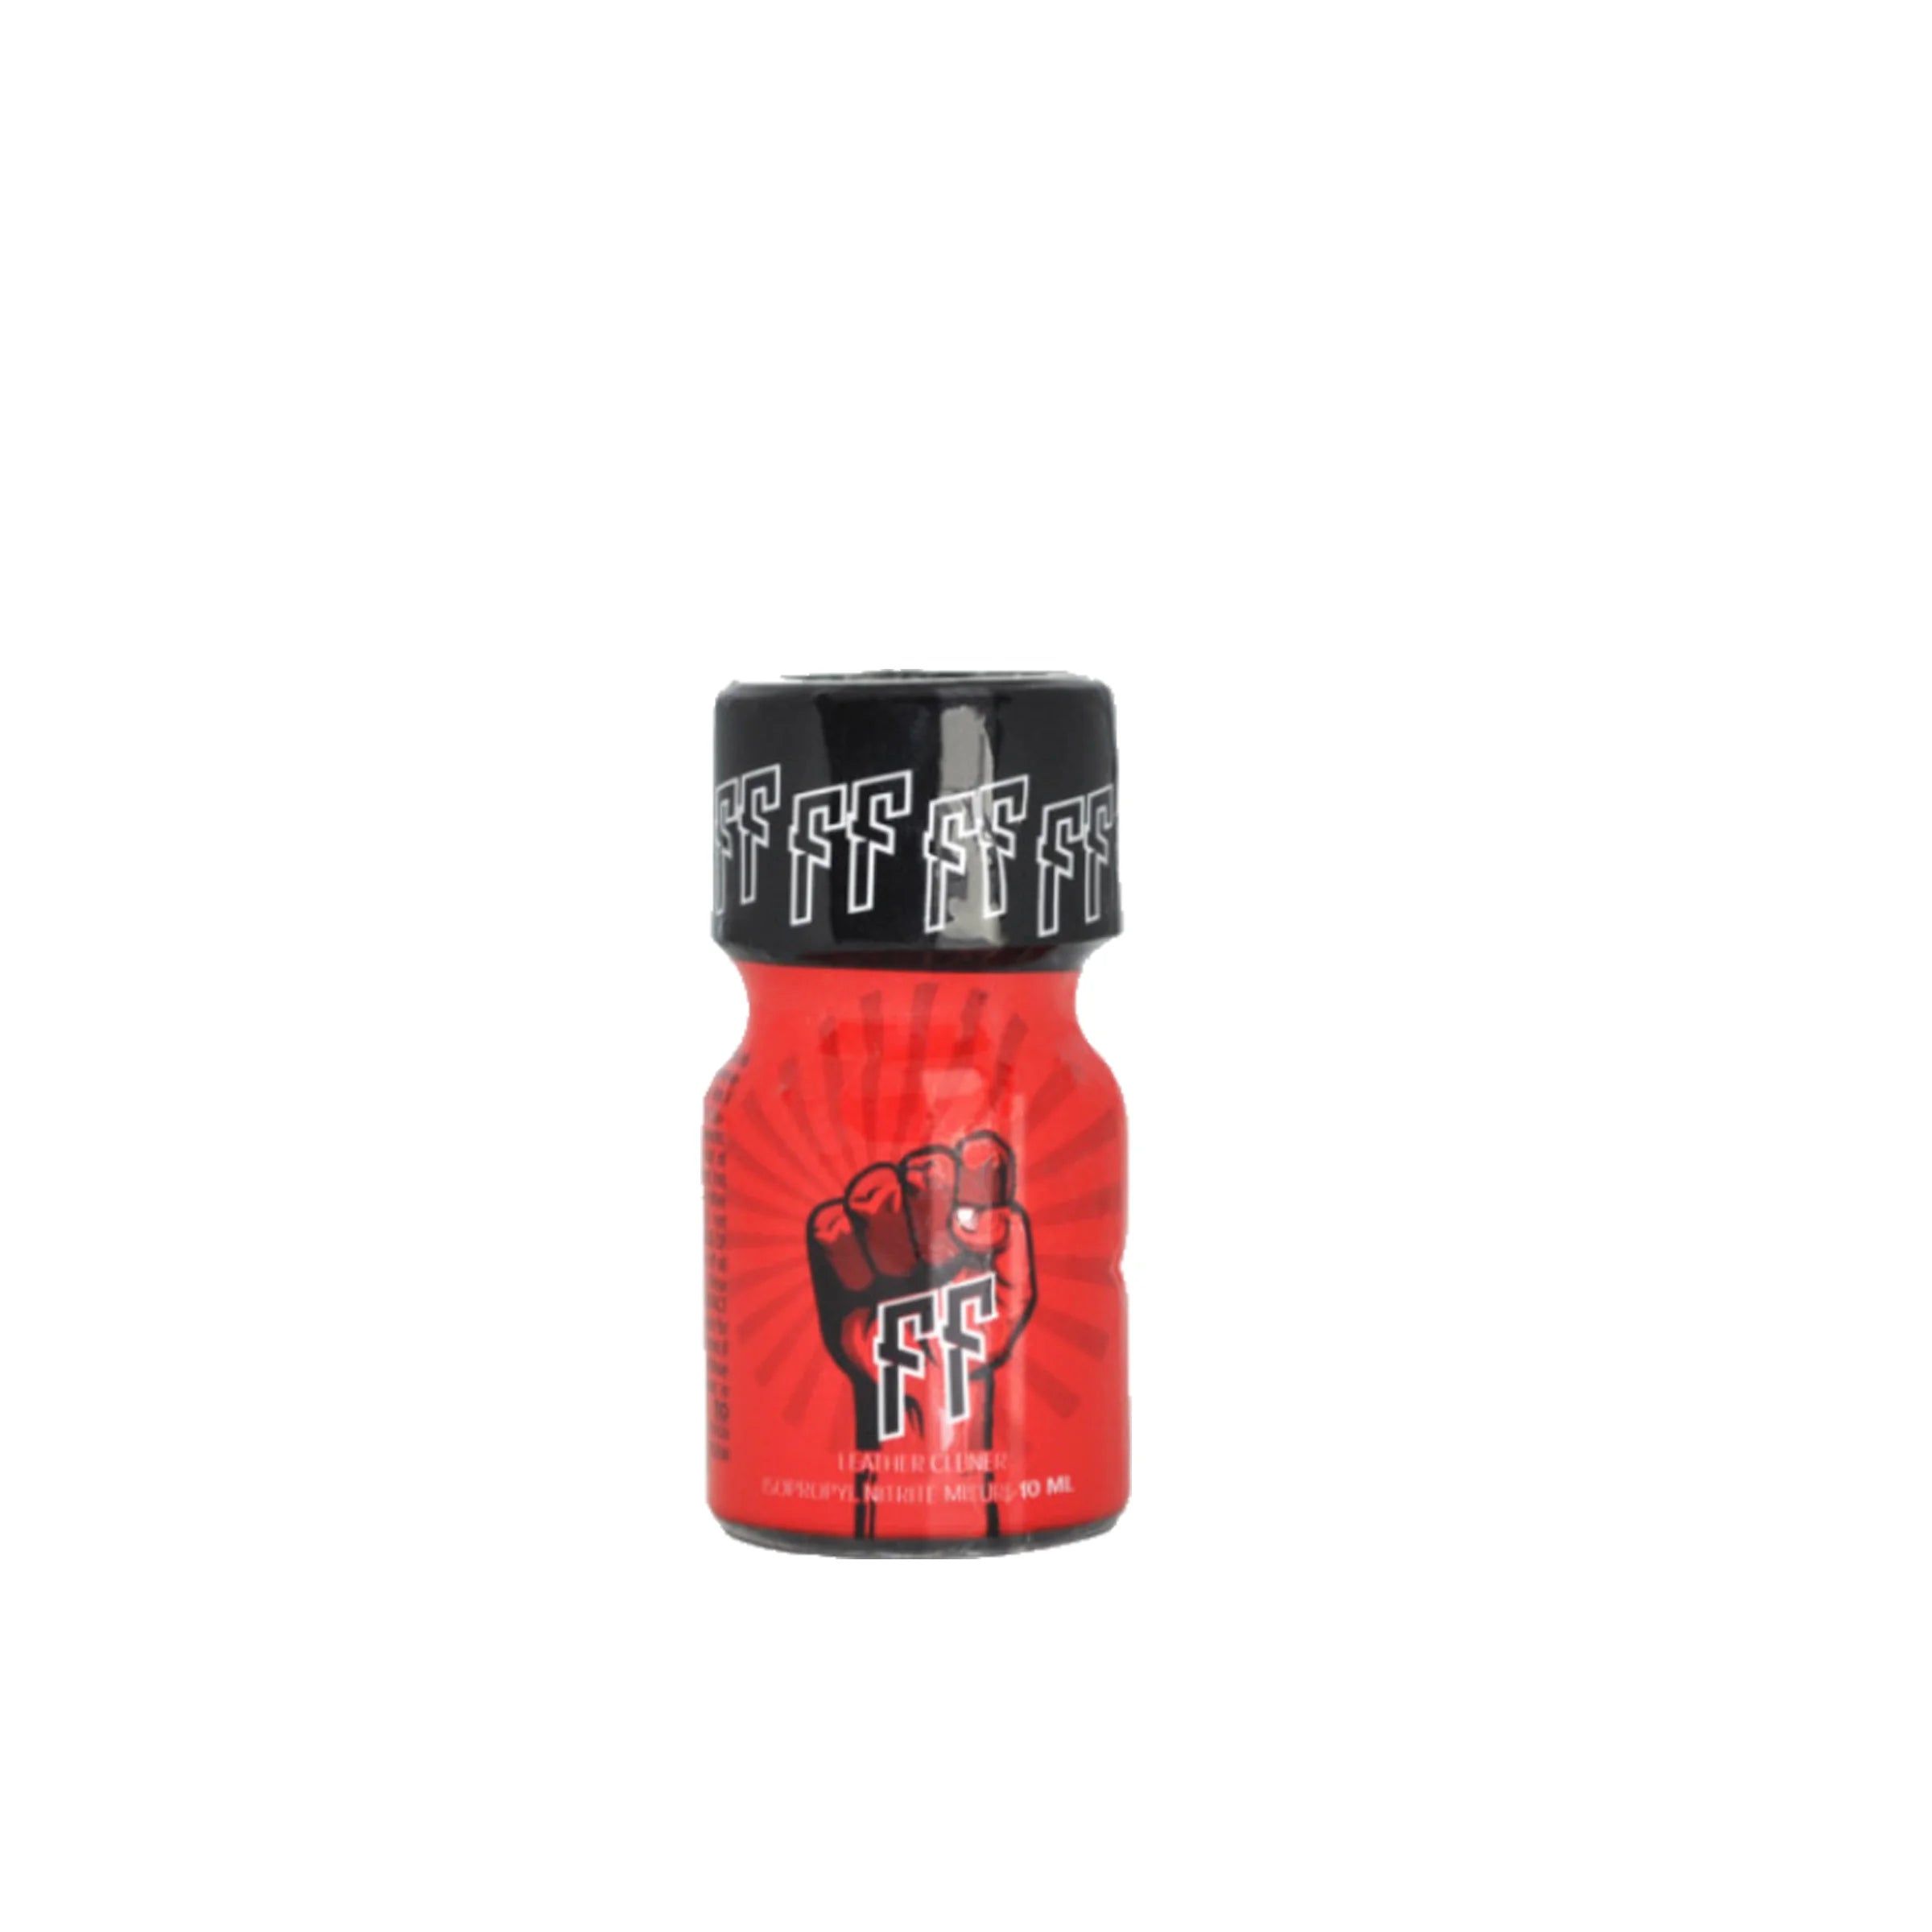 A product photo of a 10ml bottle of Propyl FF poppers.